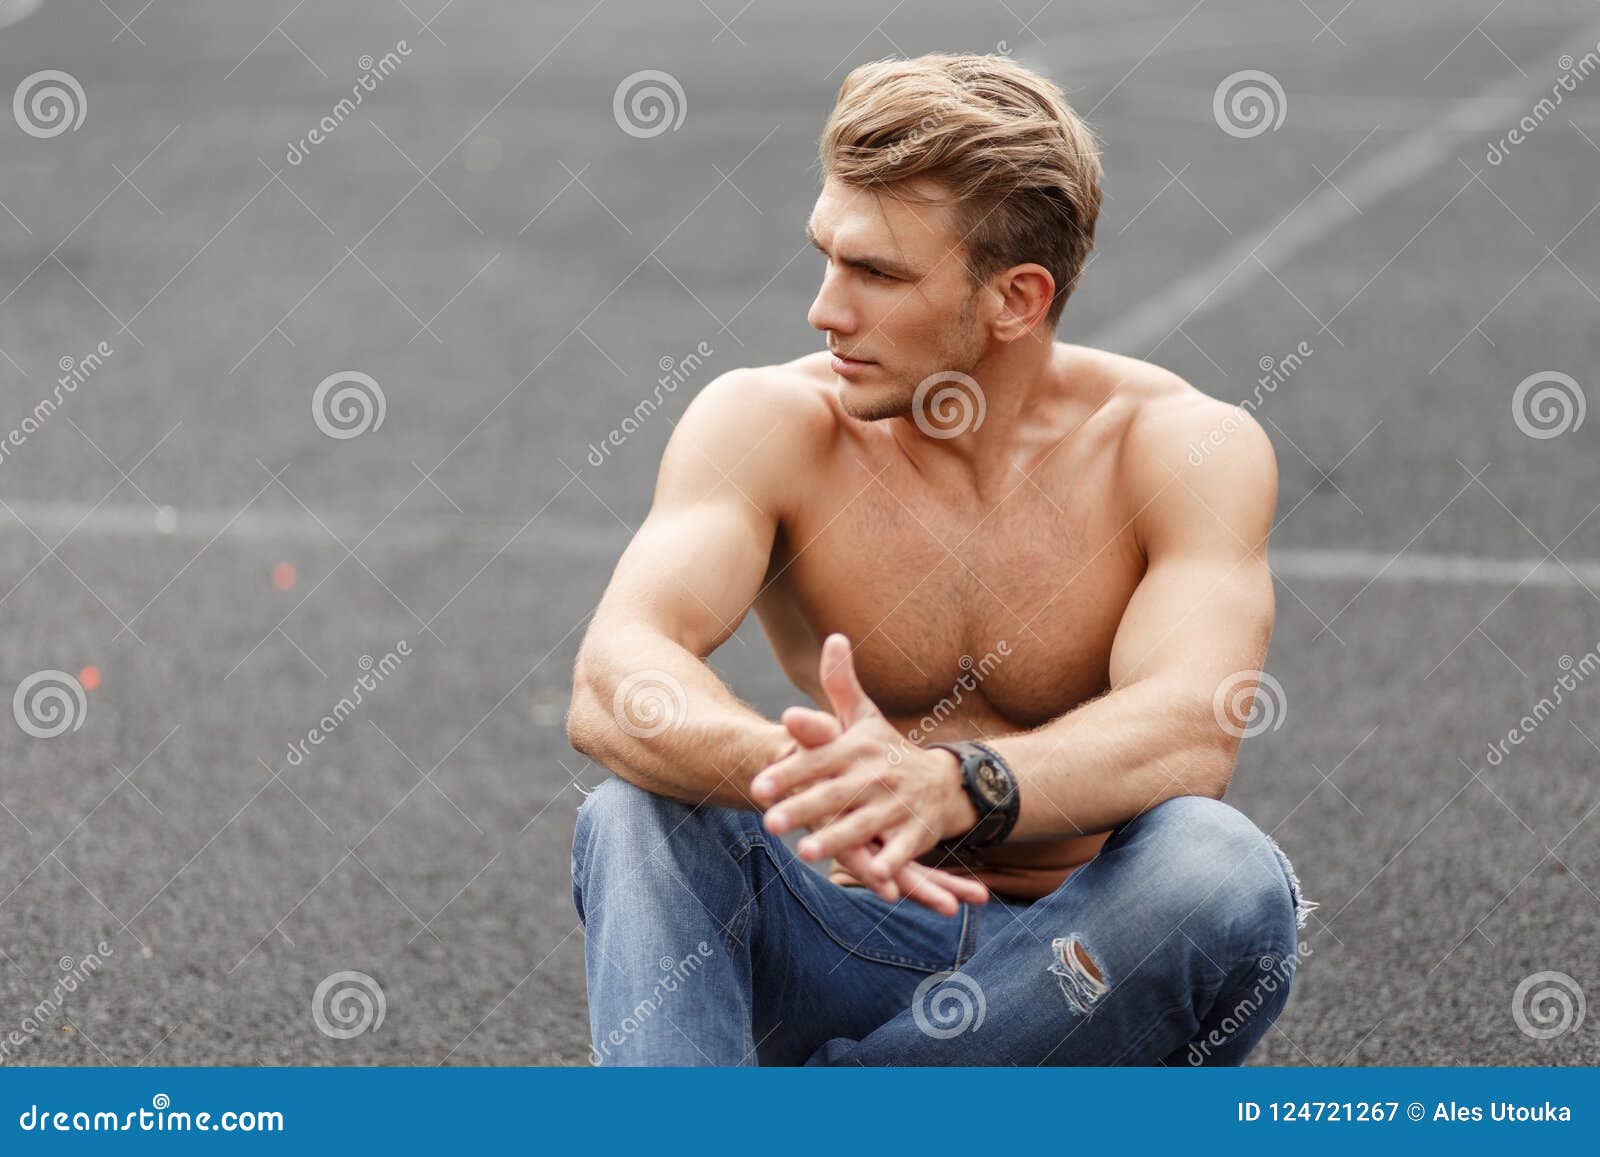 Fashionable Man With Hairstyle With A Fitness Naked Torso Sits Stock